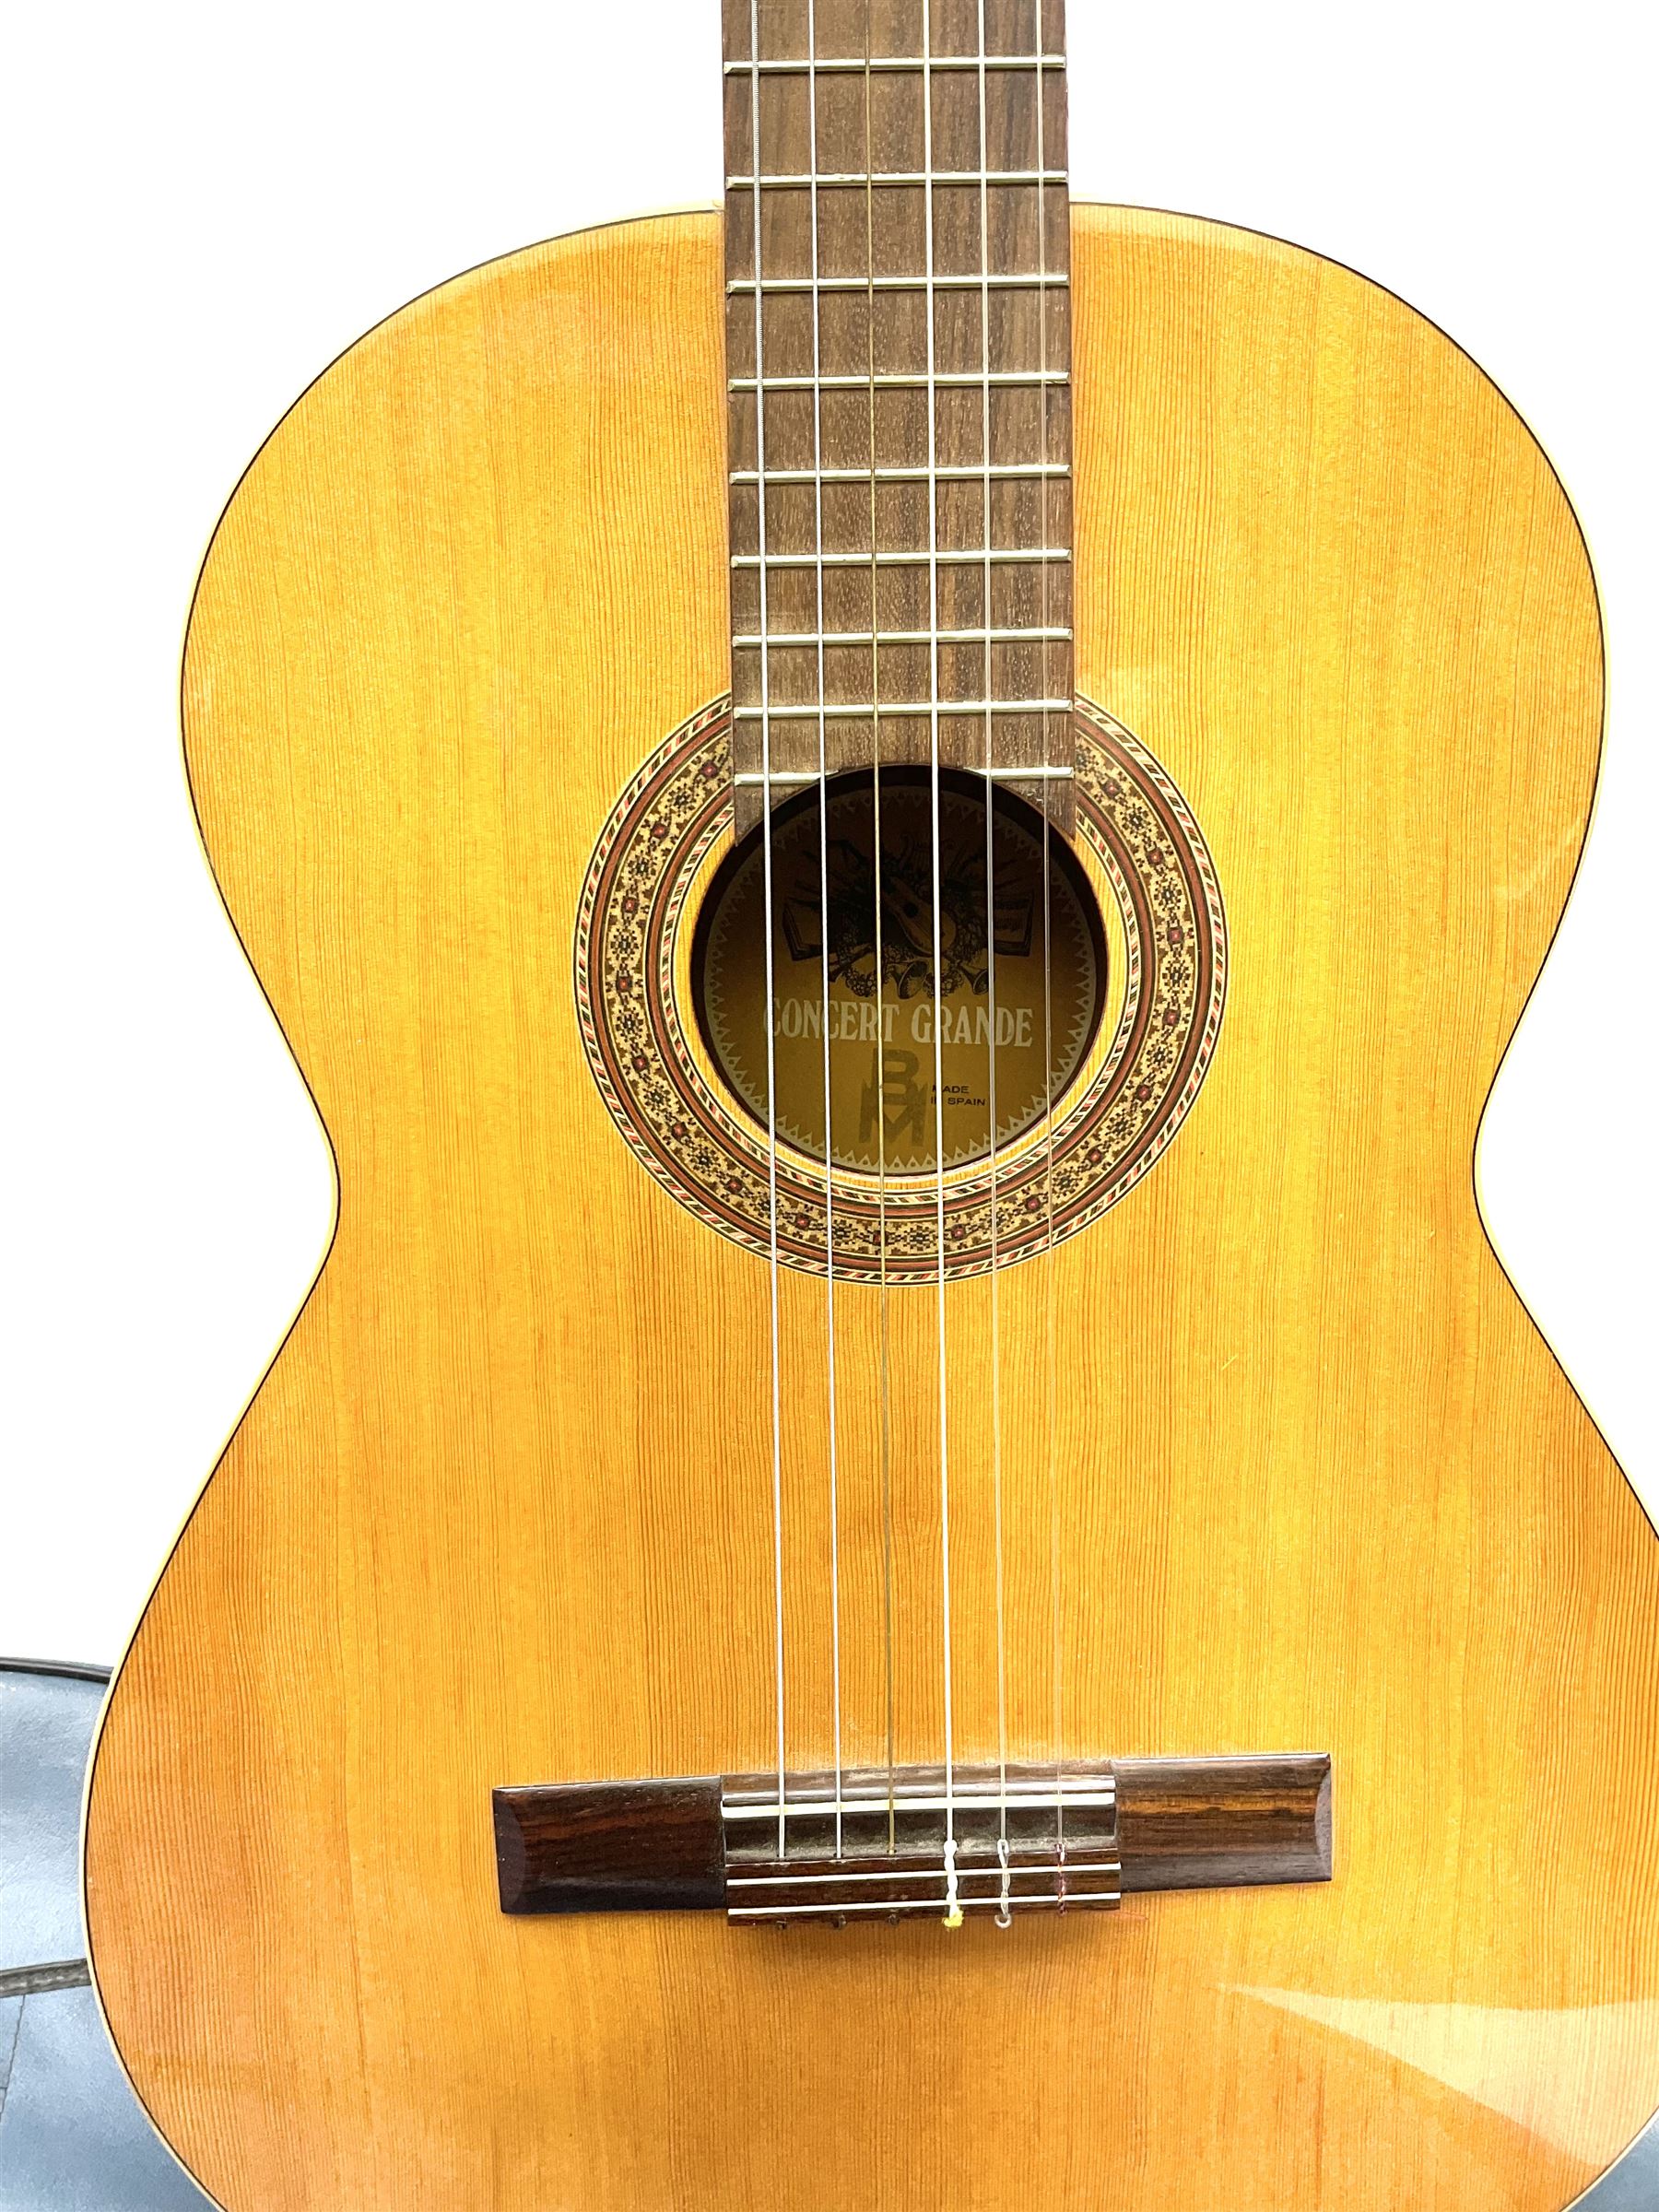 Spanish Concert Grande acoustic guitar with mahogany back and ribs and spruce top L100cm; in soft ca - Image 3 of 17